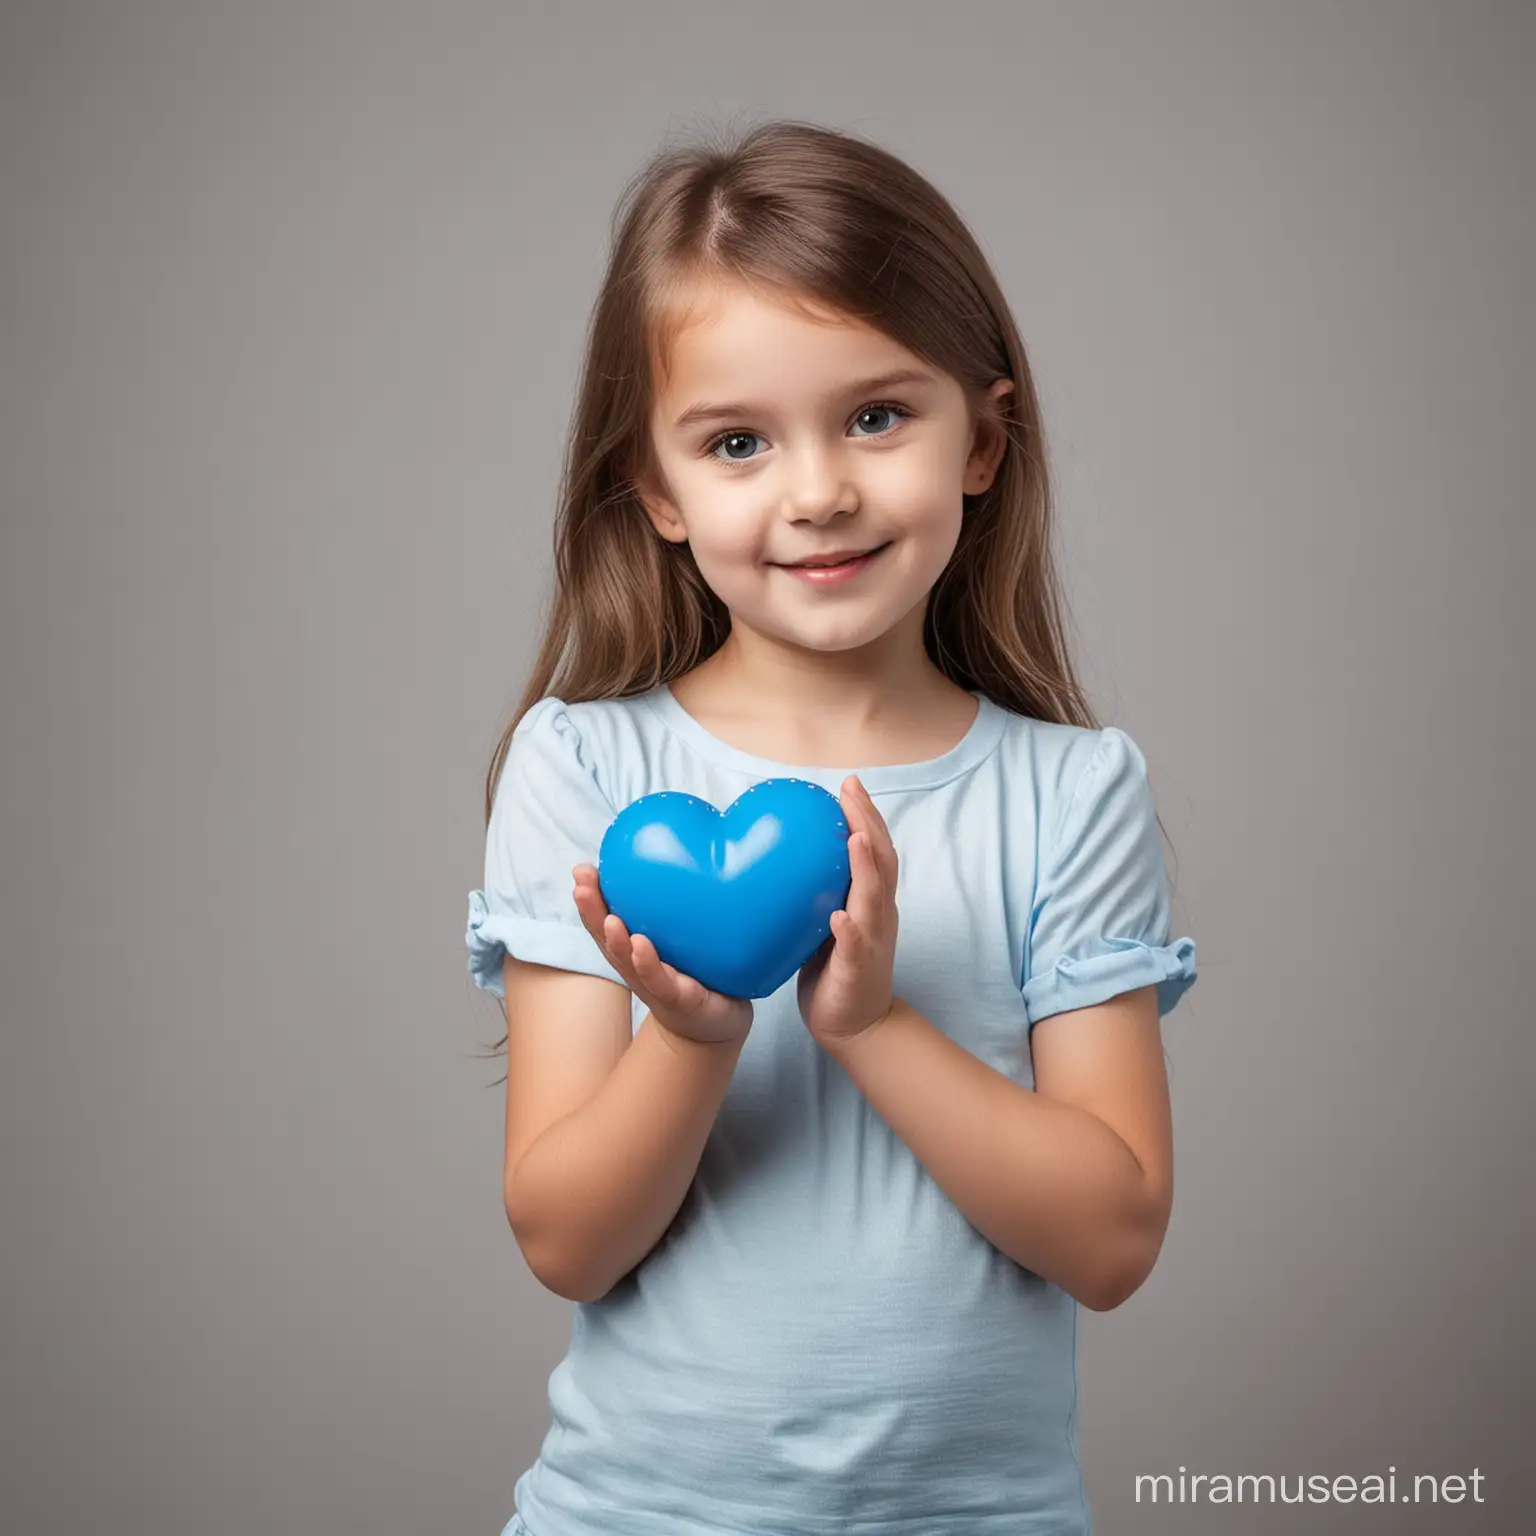 Adorable Little Girl Holding Blue Heart with Both Hands